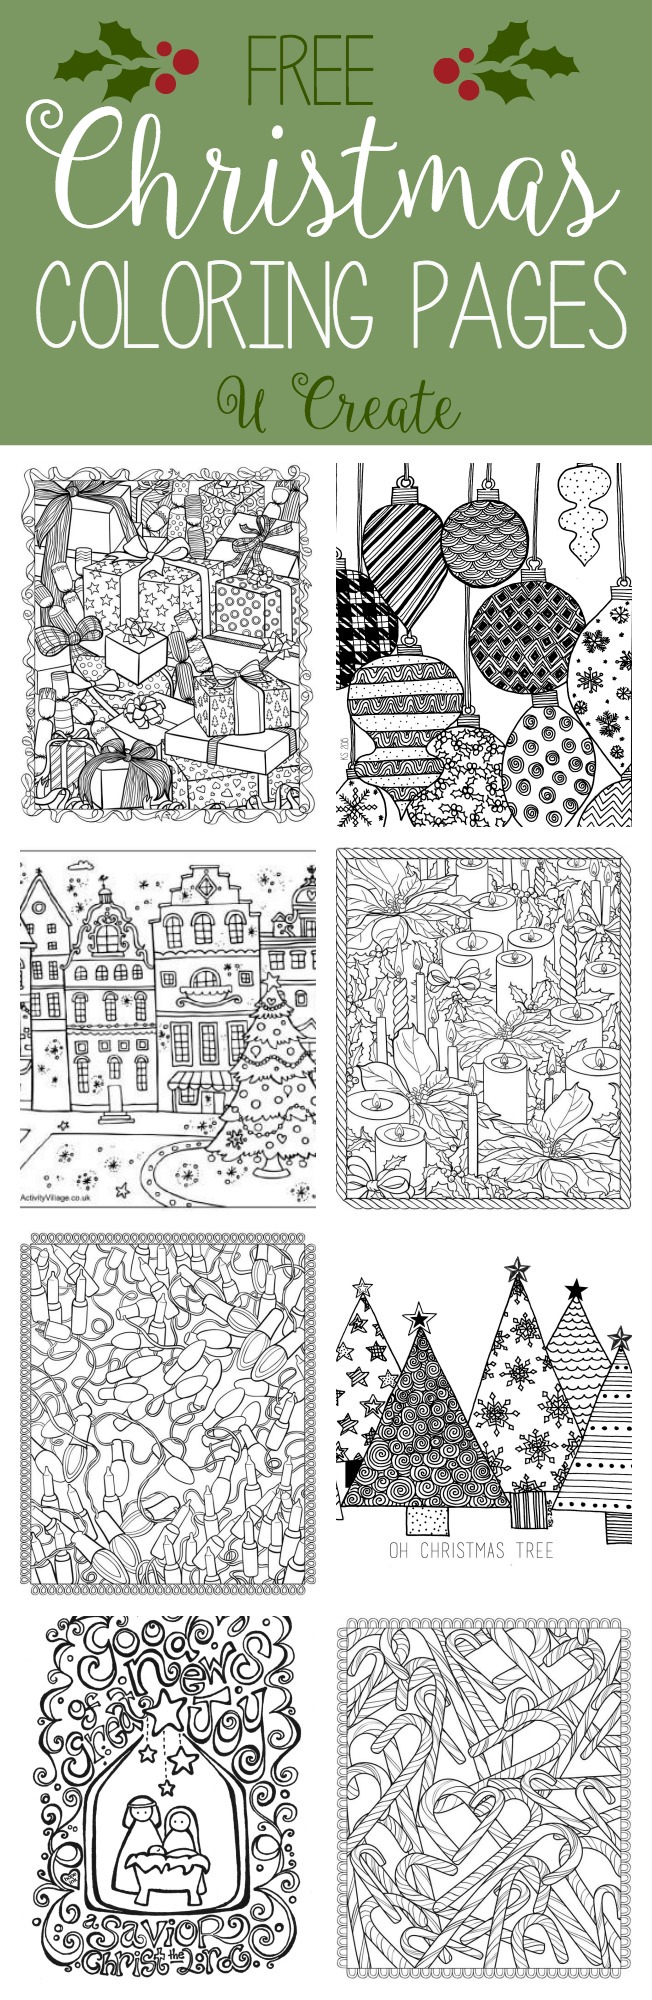 Free Christmas Adult Coloring Pages at U Create